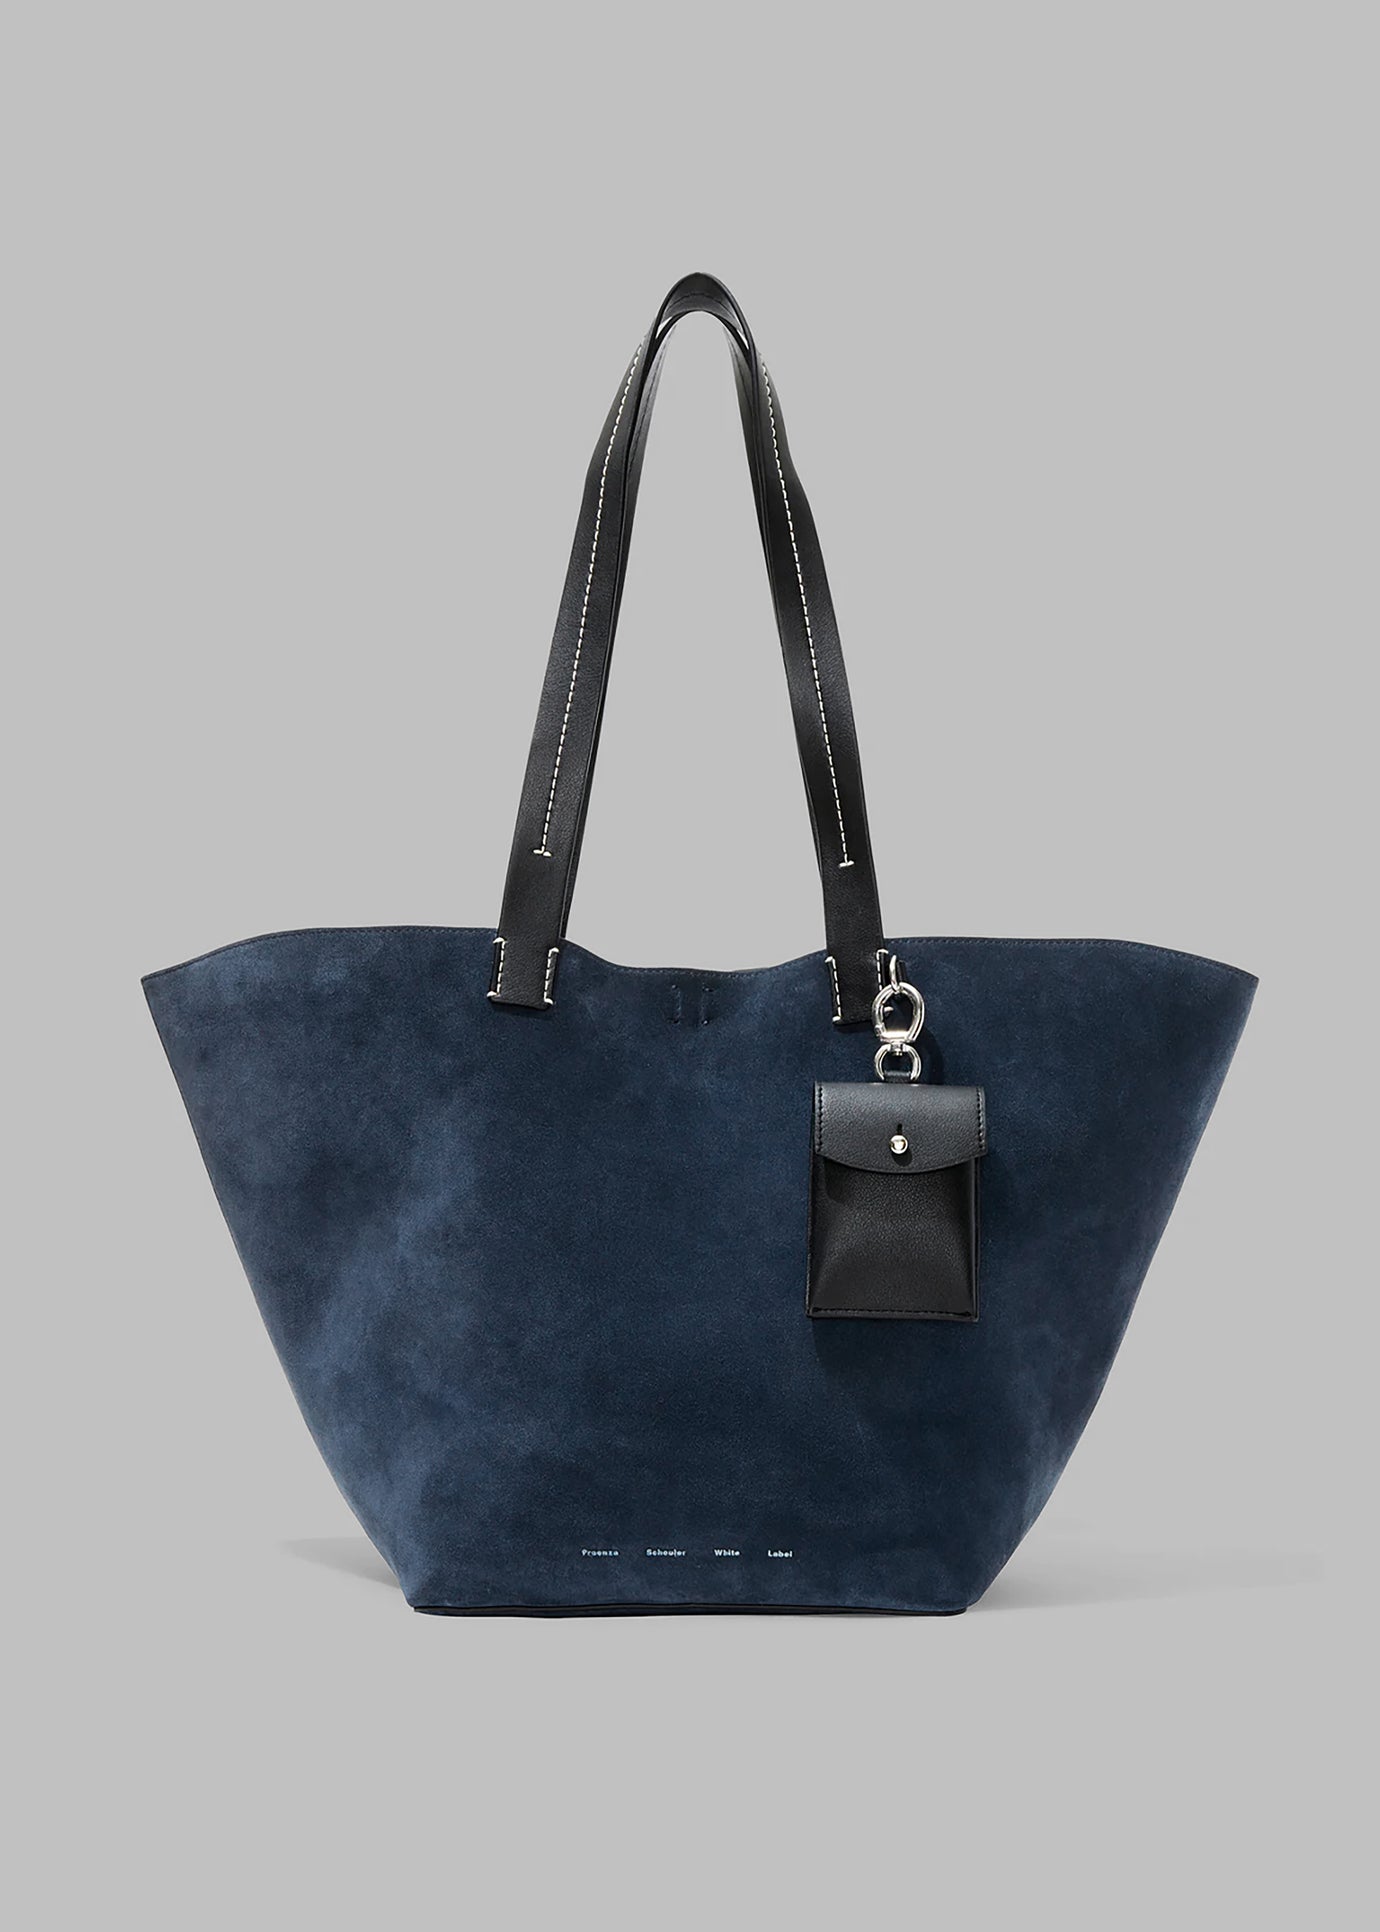 Proenza Schouler White Label Large Suede Bedford Tote - Navy/Black